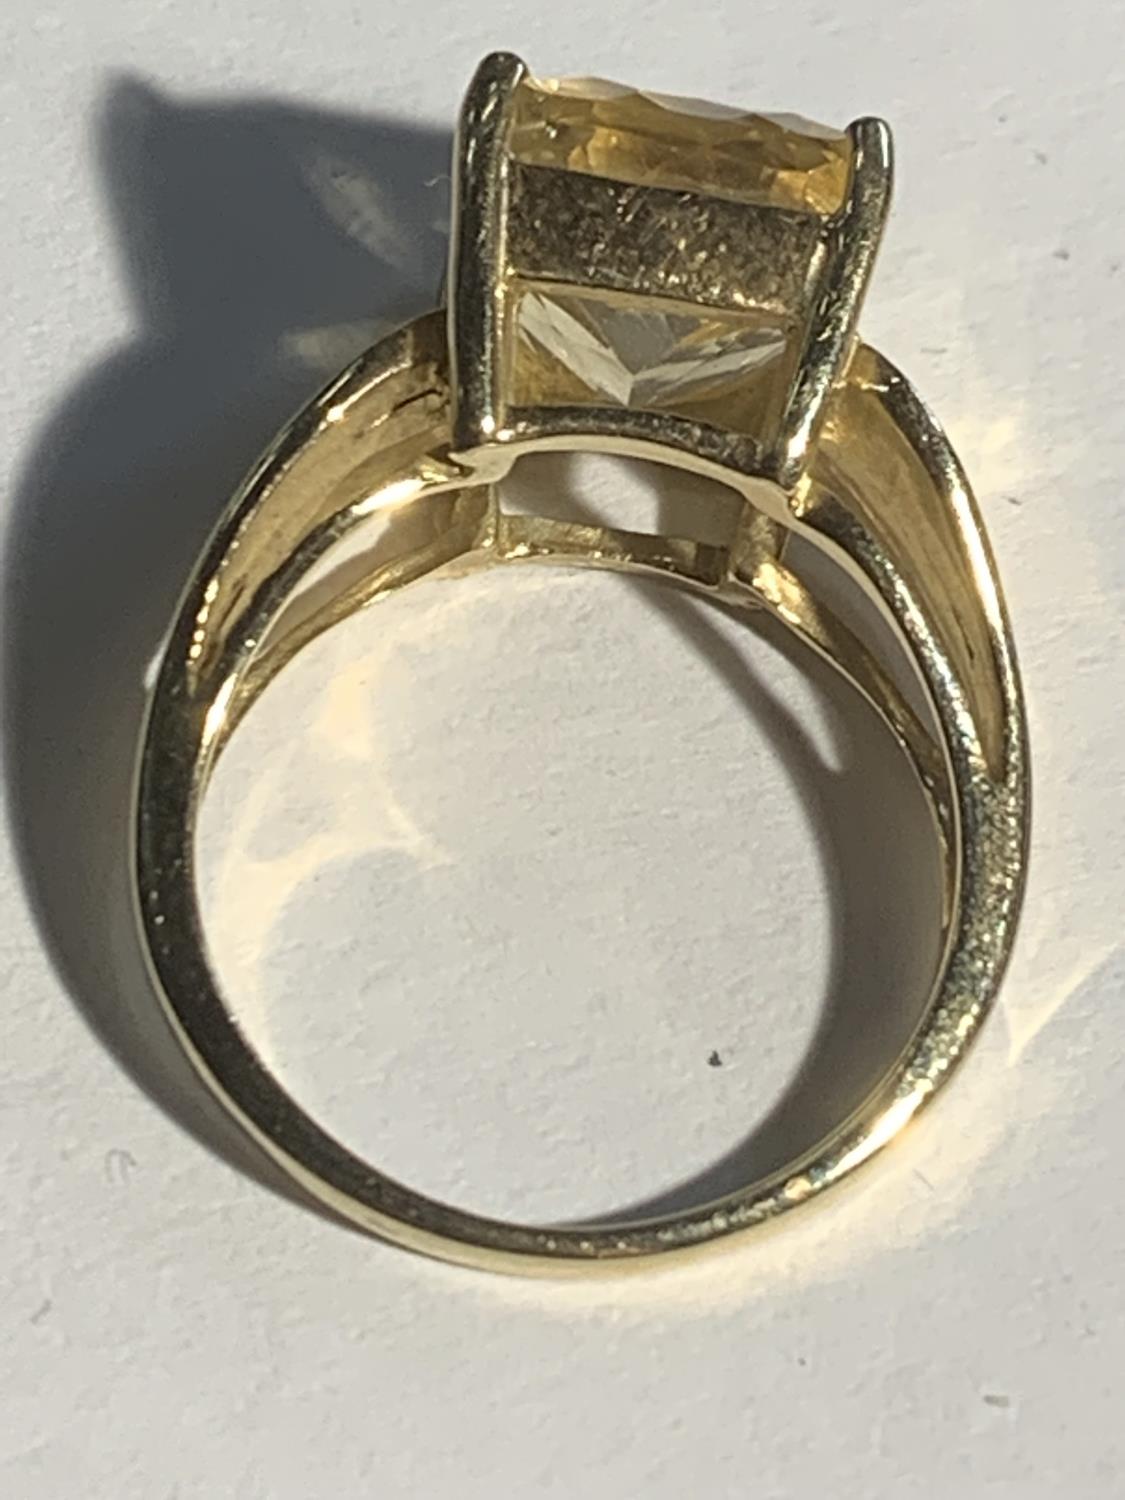 A 9 CARAT GOLD RING WITH A LARGE YELLOW COLOURED CENTRE STONE SIZE N/O GROSS WEIGHT 5.2 GRAMS - Image 3 of 4